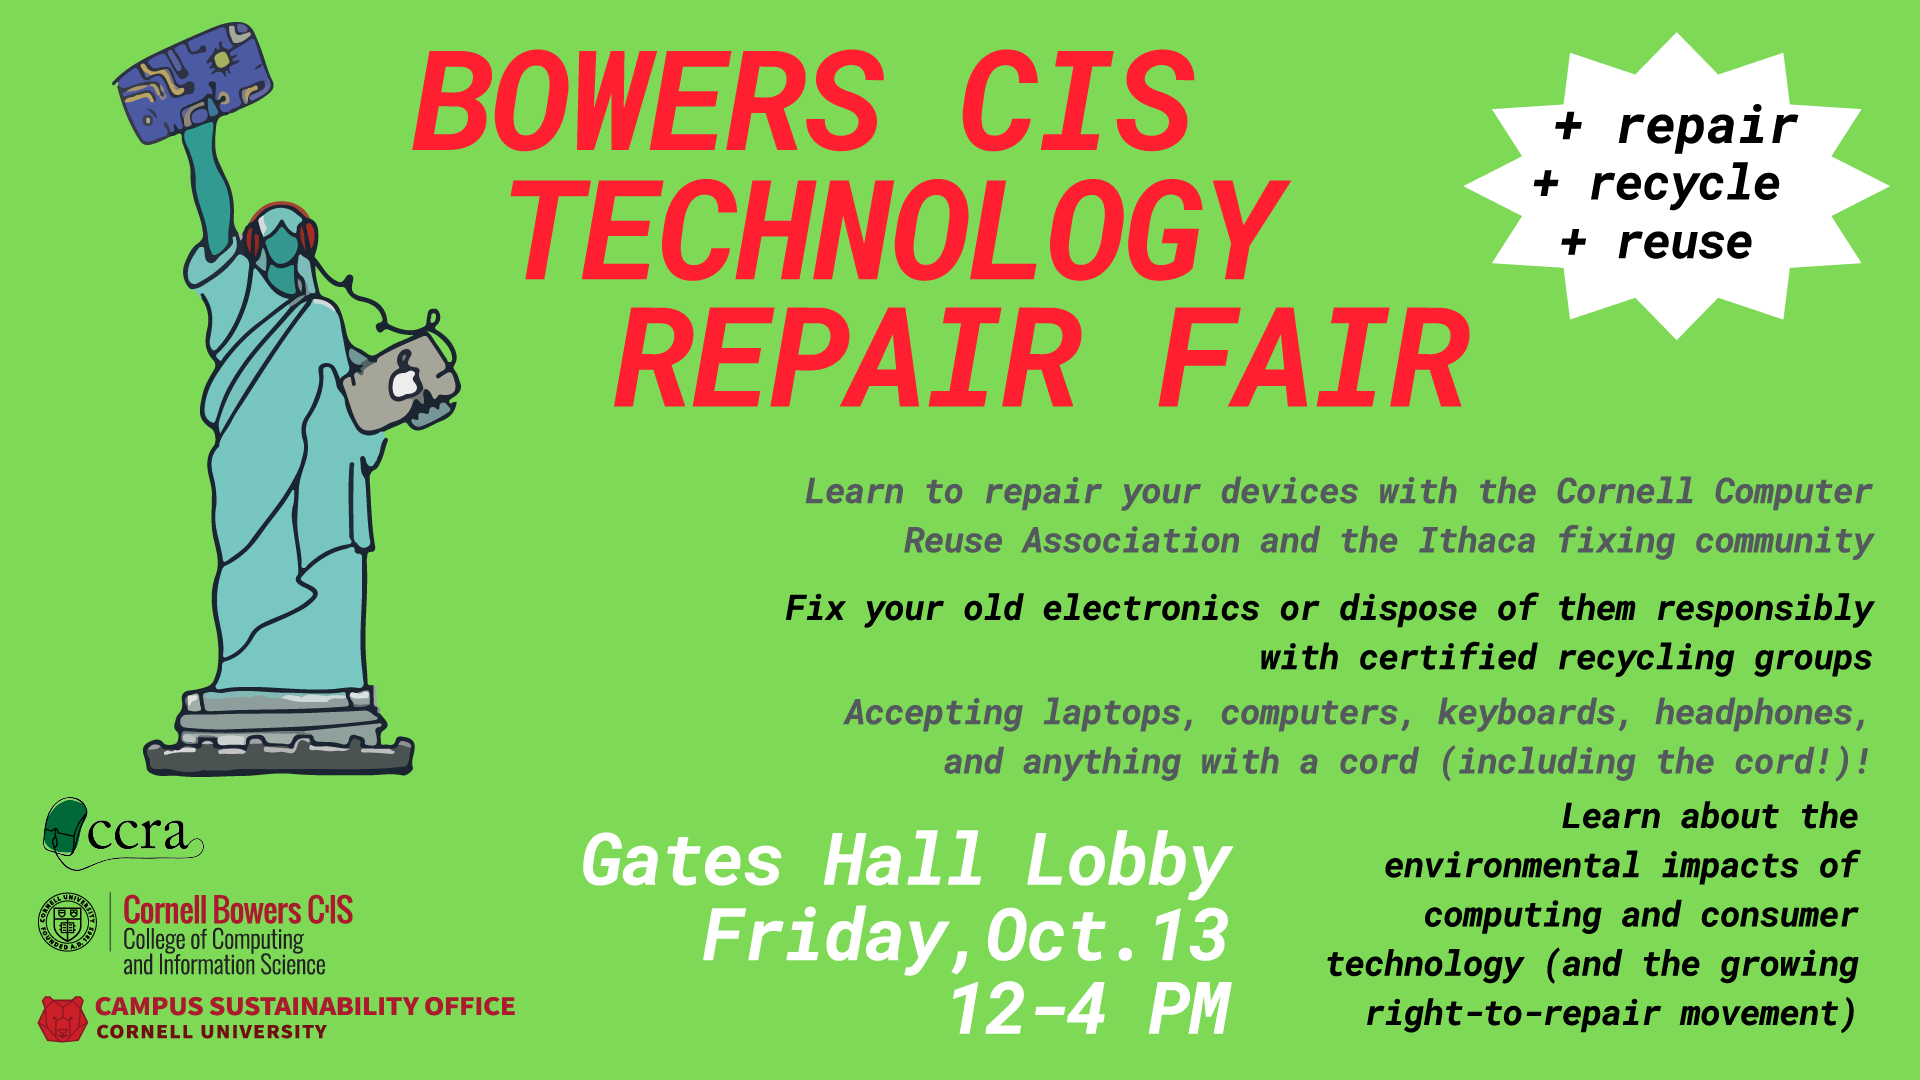 Poster for the Cornell Bowers CIS Repair Fair on Friday, 10/13